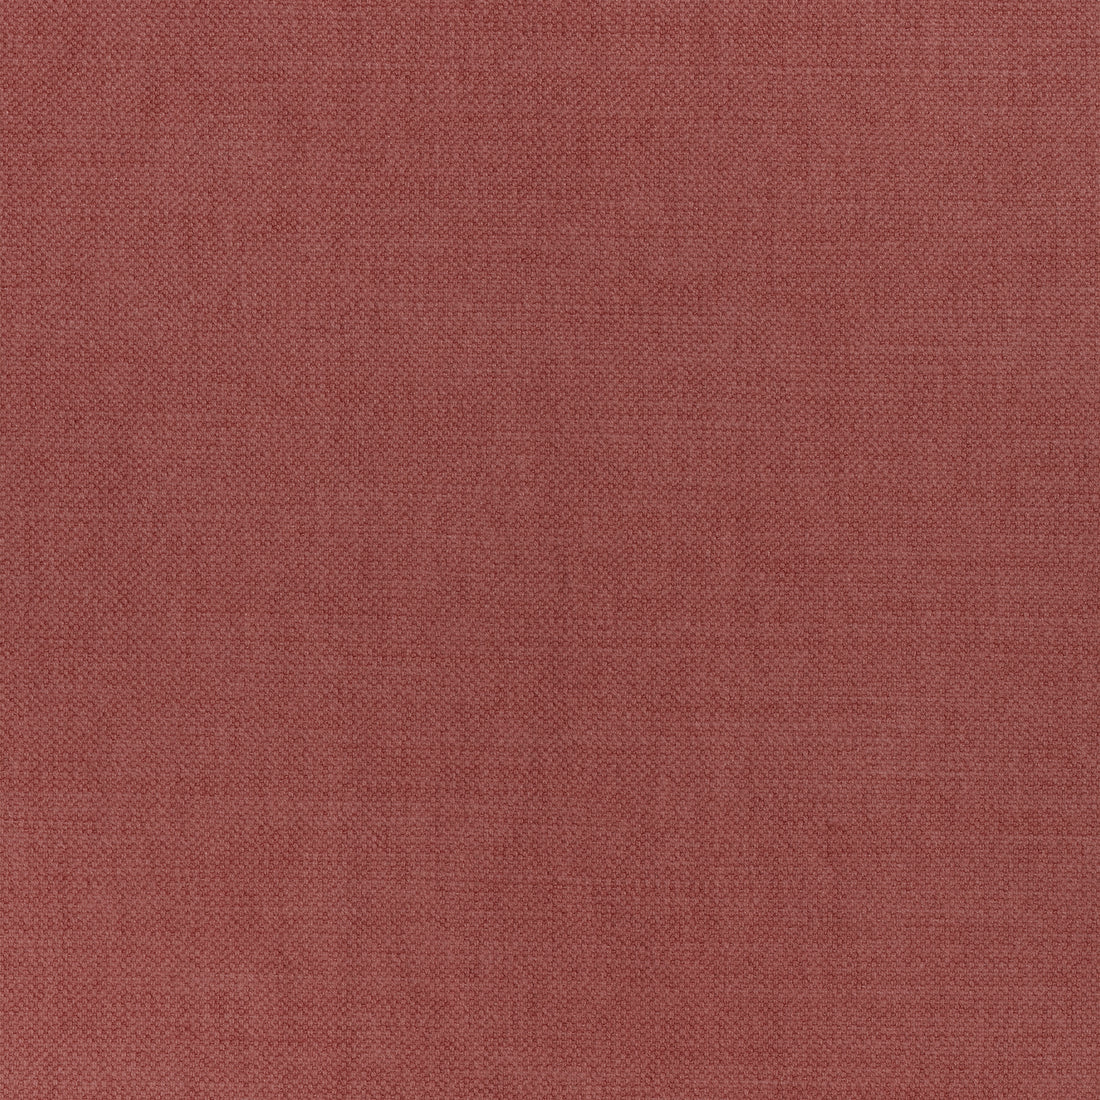 Prisma fabric in cranberry color - pattern number W70128 - by Thibaut in the Woven Resource Vol 12 Prisma Fabrics collection